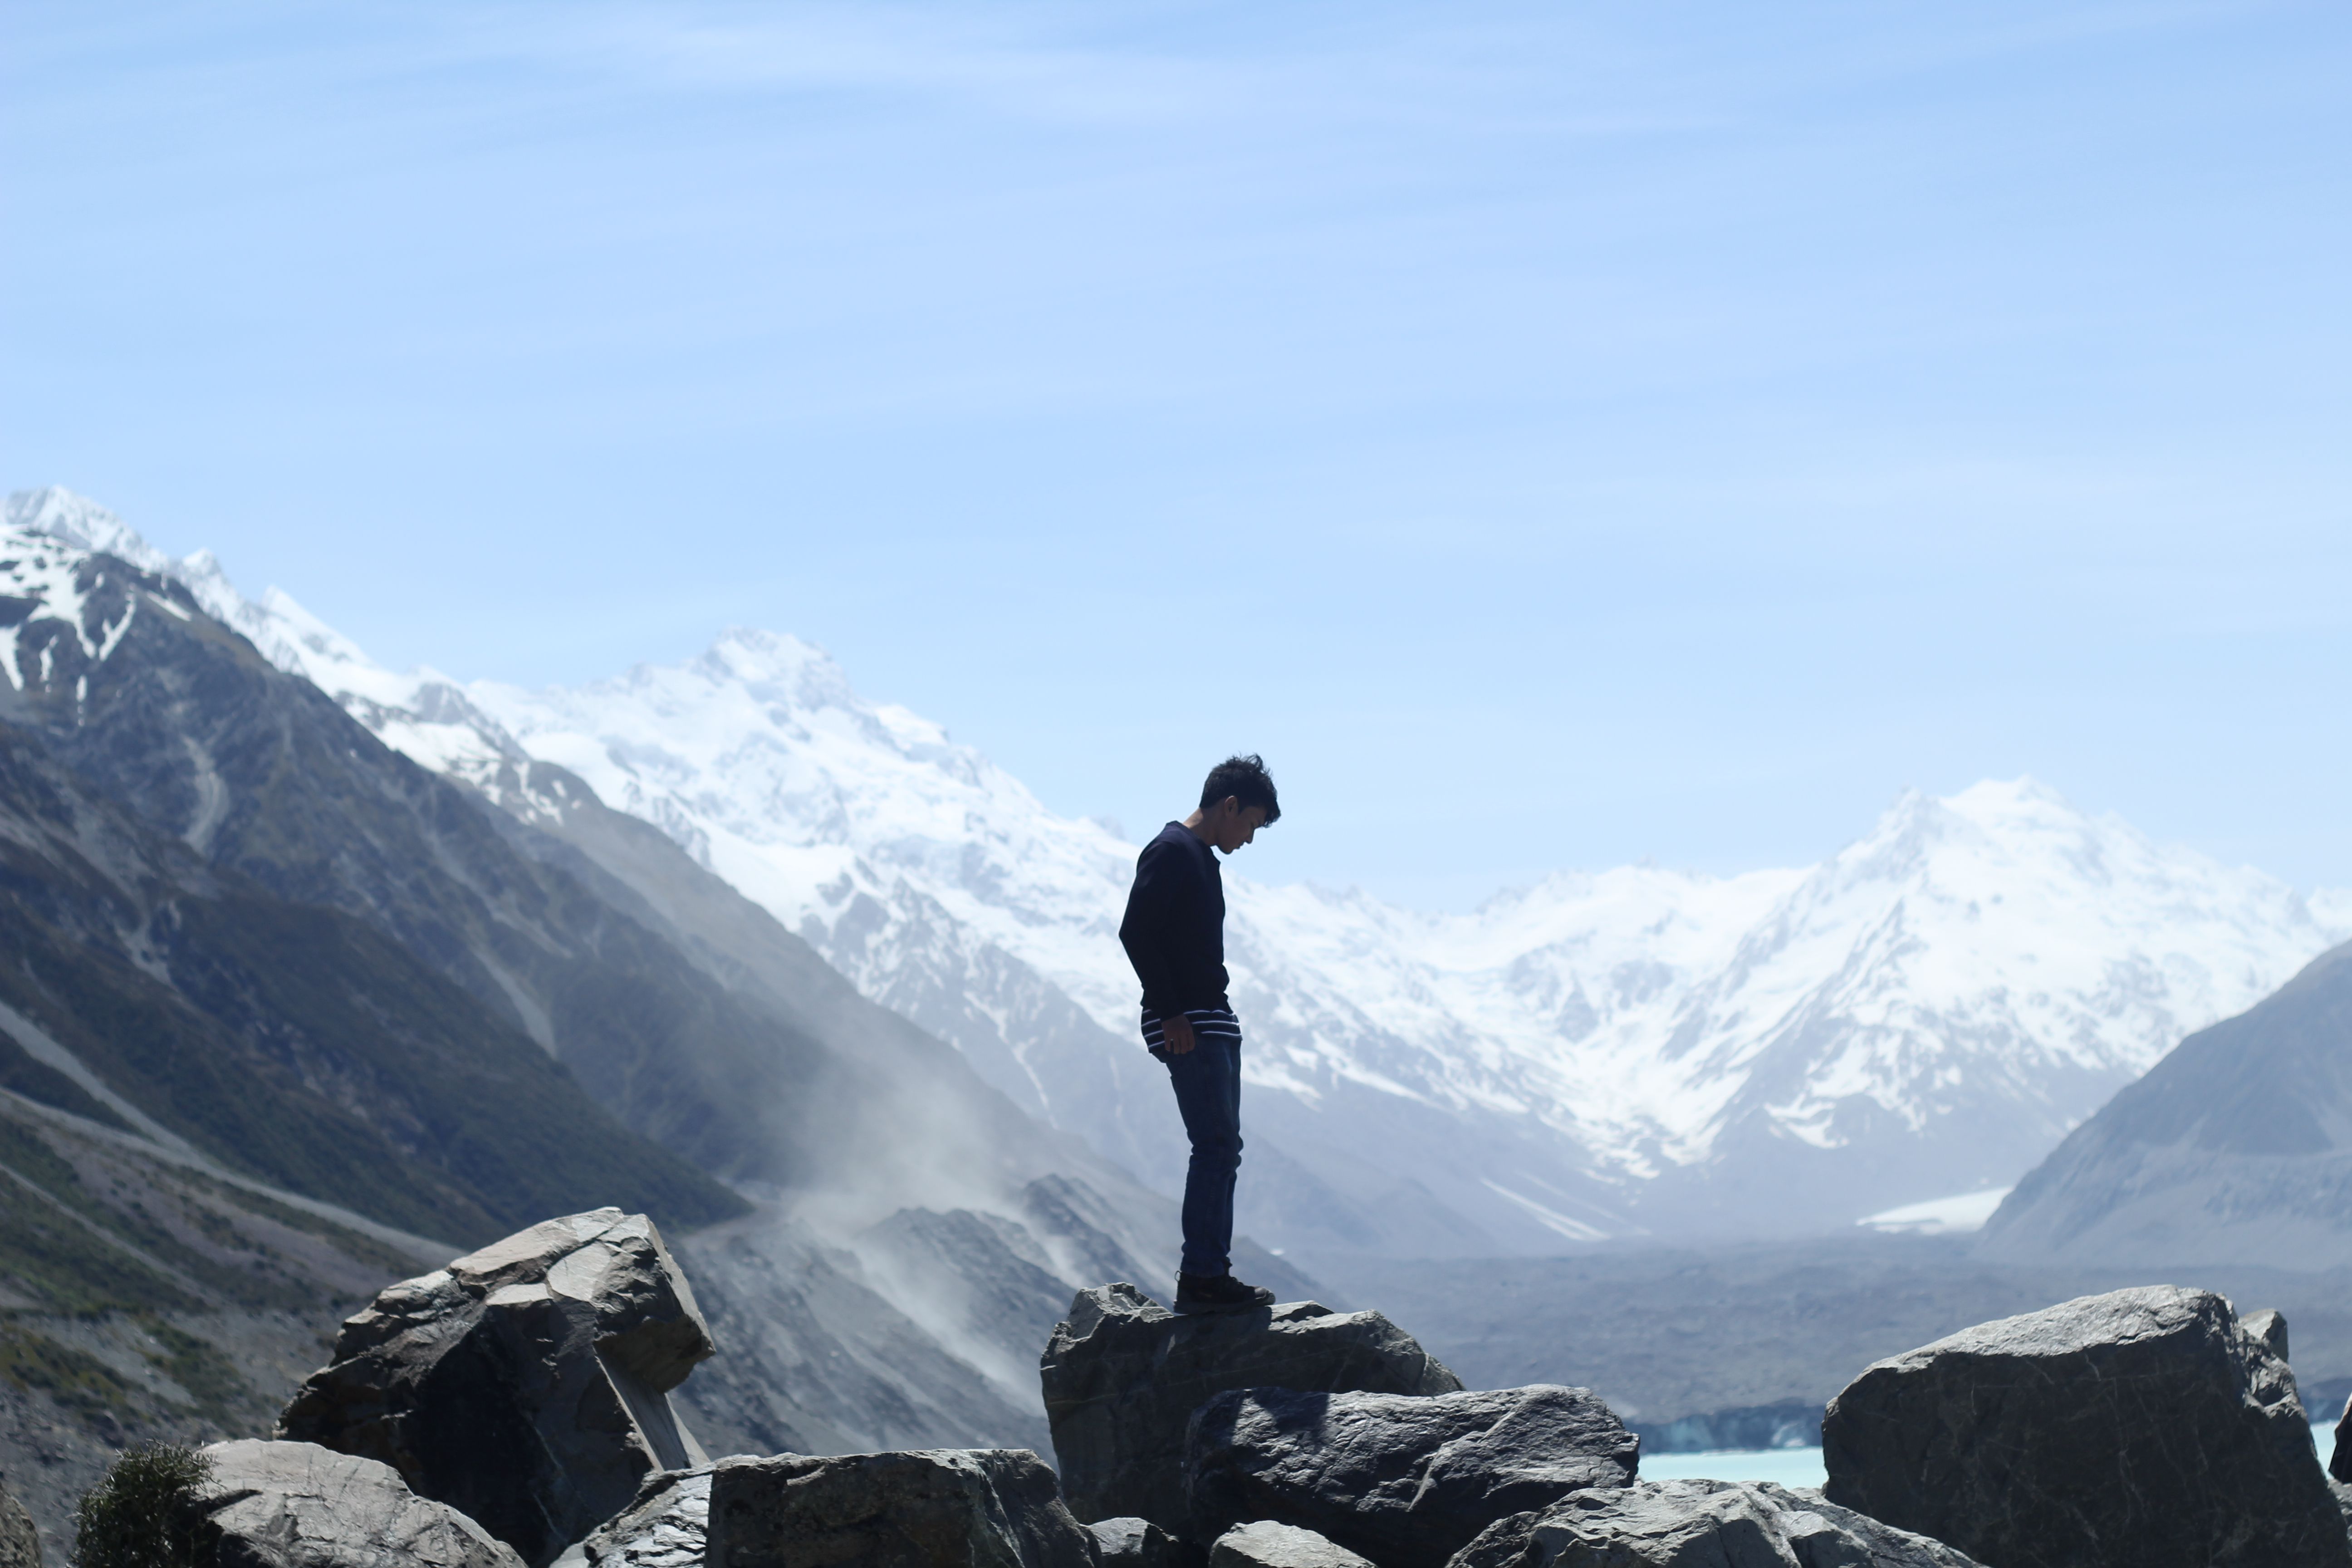 The photo of Farhan with Mt. Cook as a background